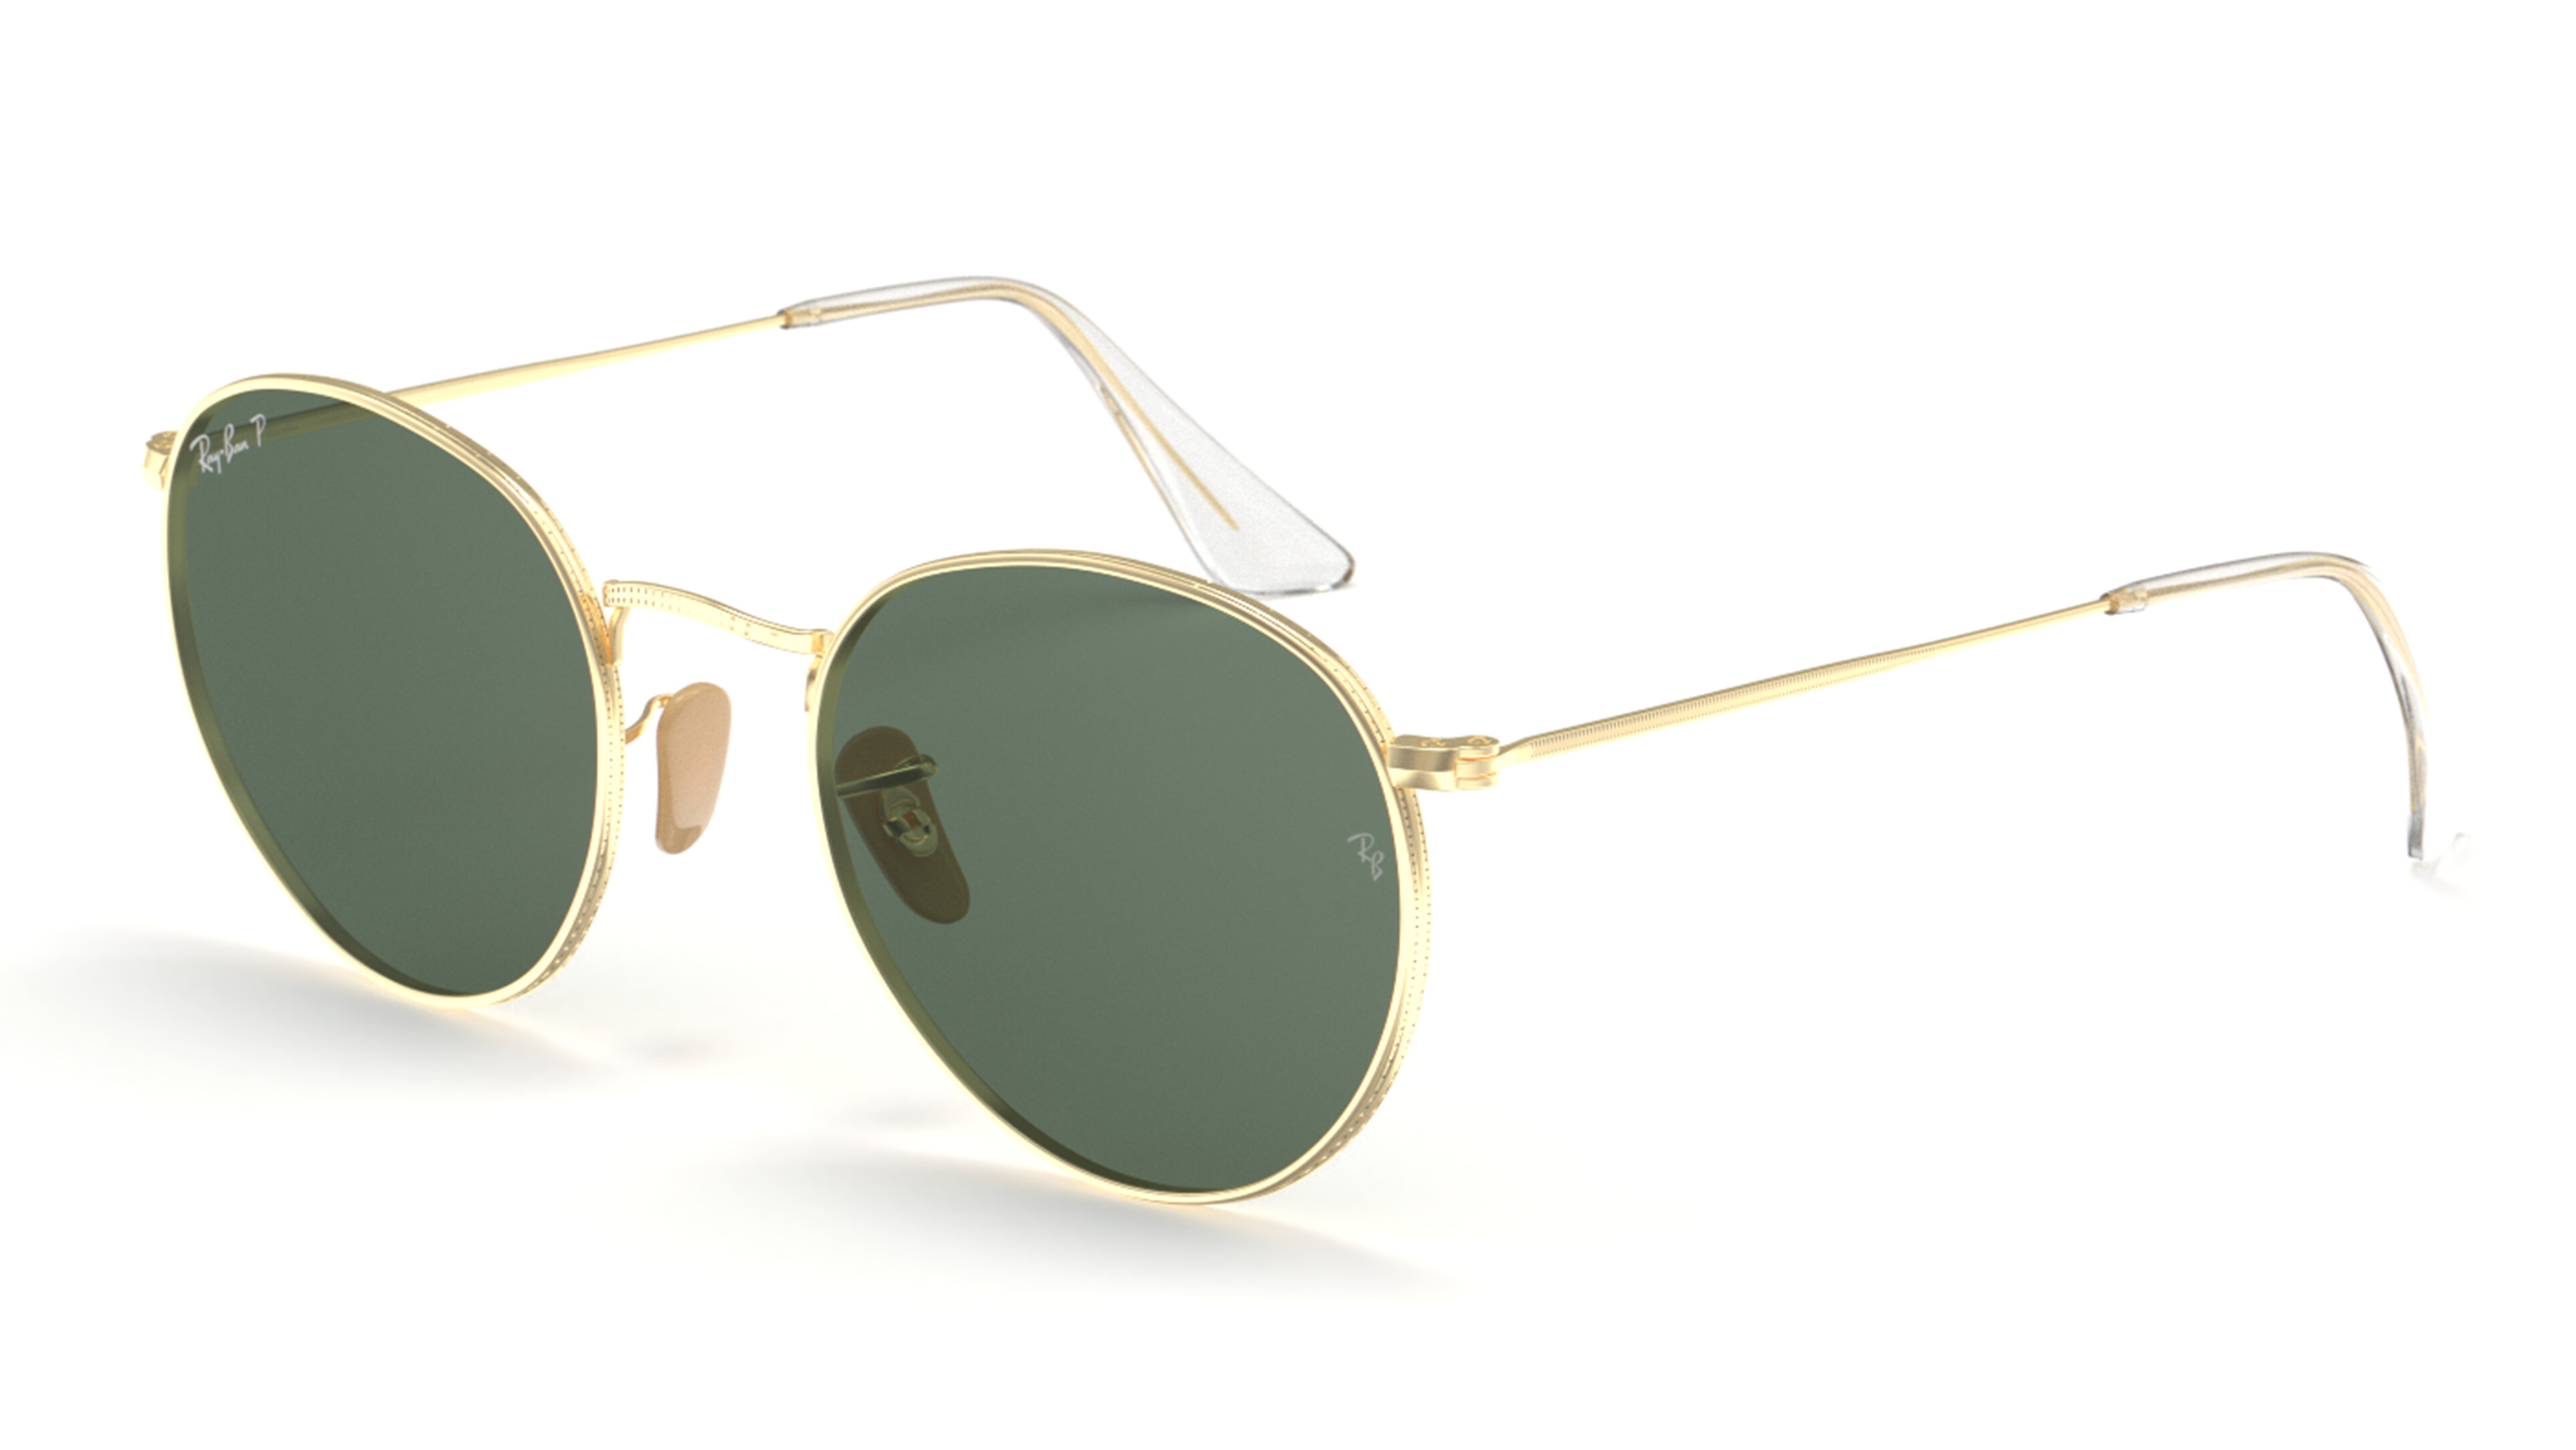 [products.image.angle_left01] Ray-Ban ROUND METAL 0RB3447 001/58 Sonnenbrille